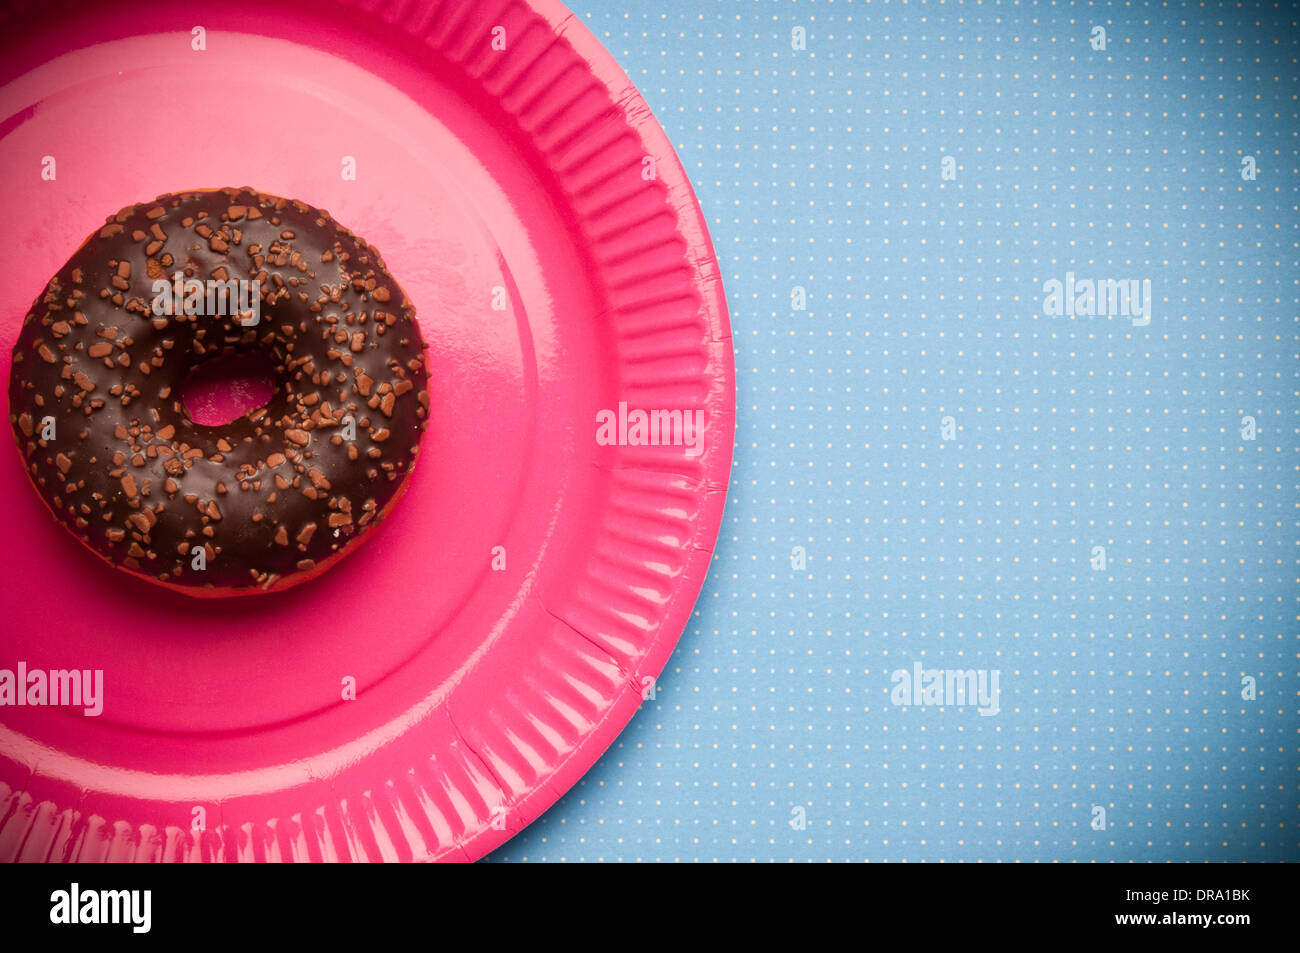 a doughnut with chocolate frosting Stock Photo